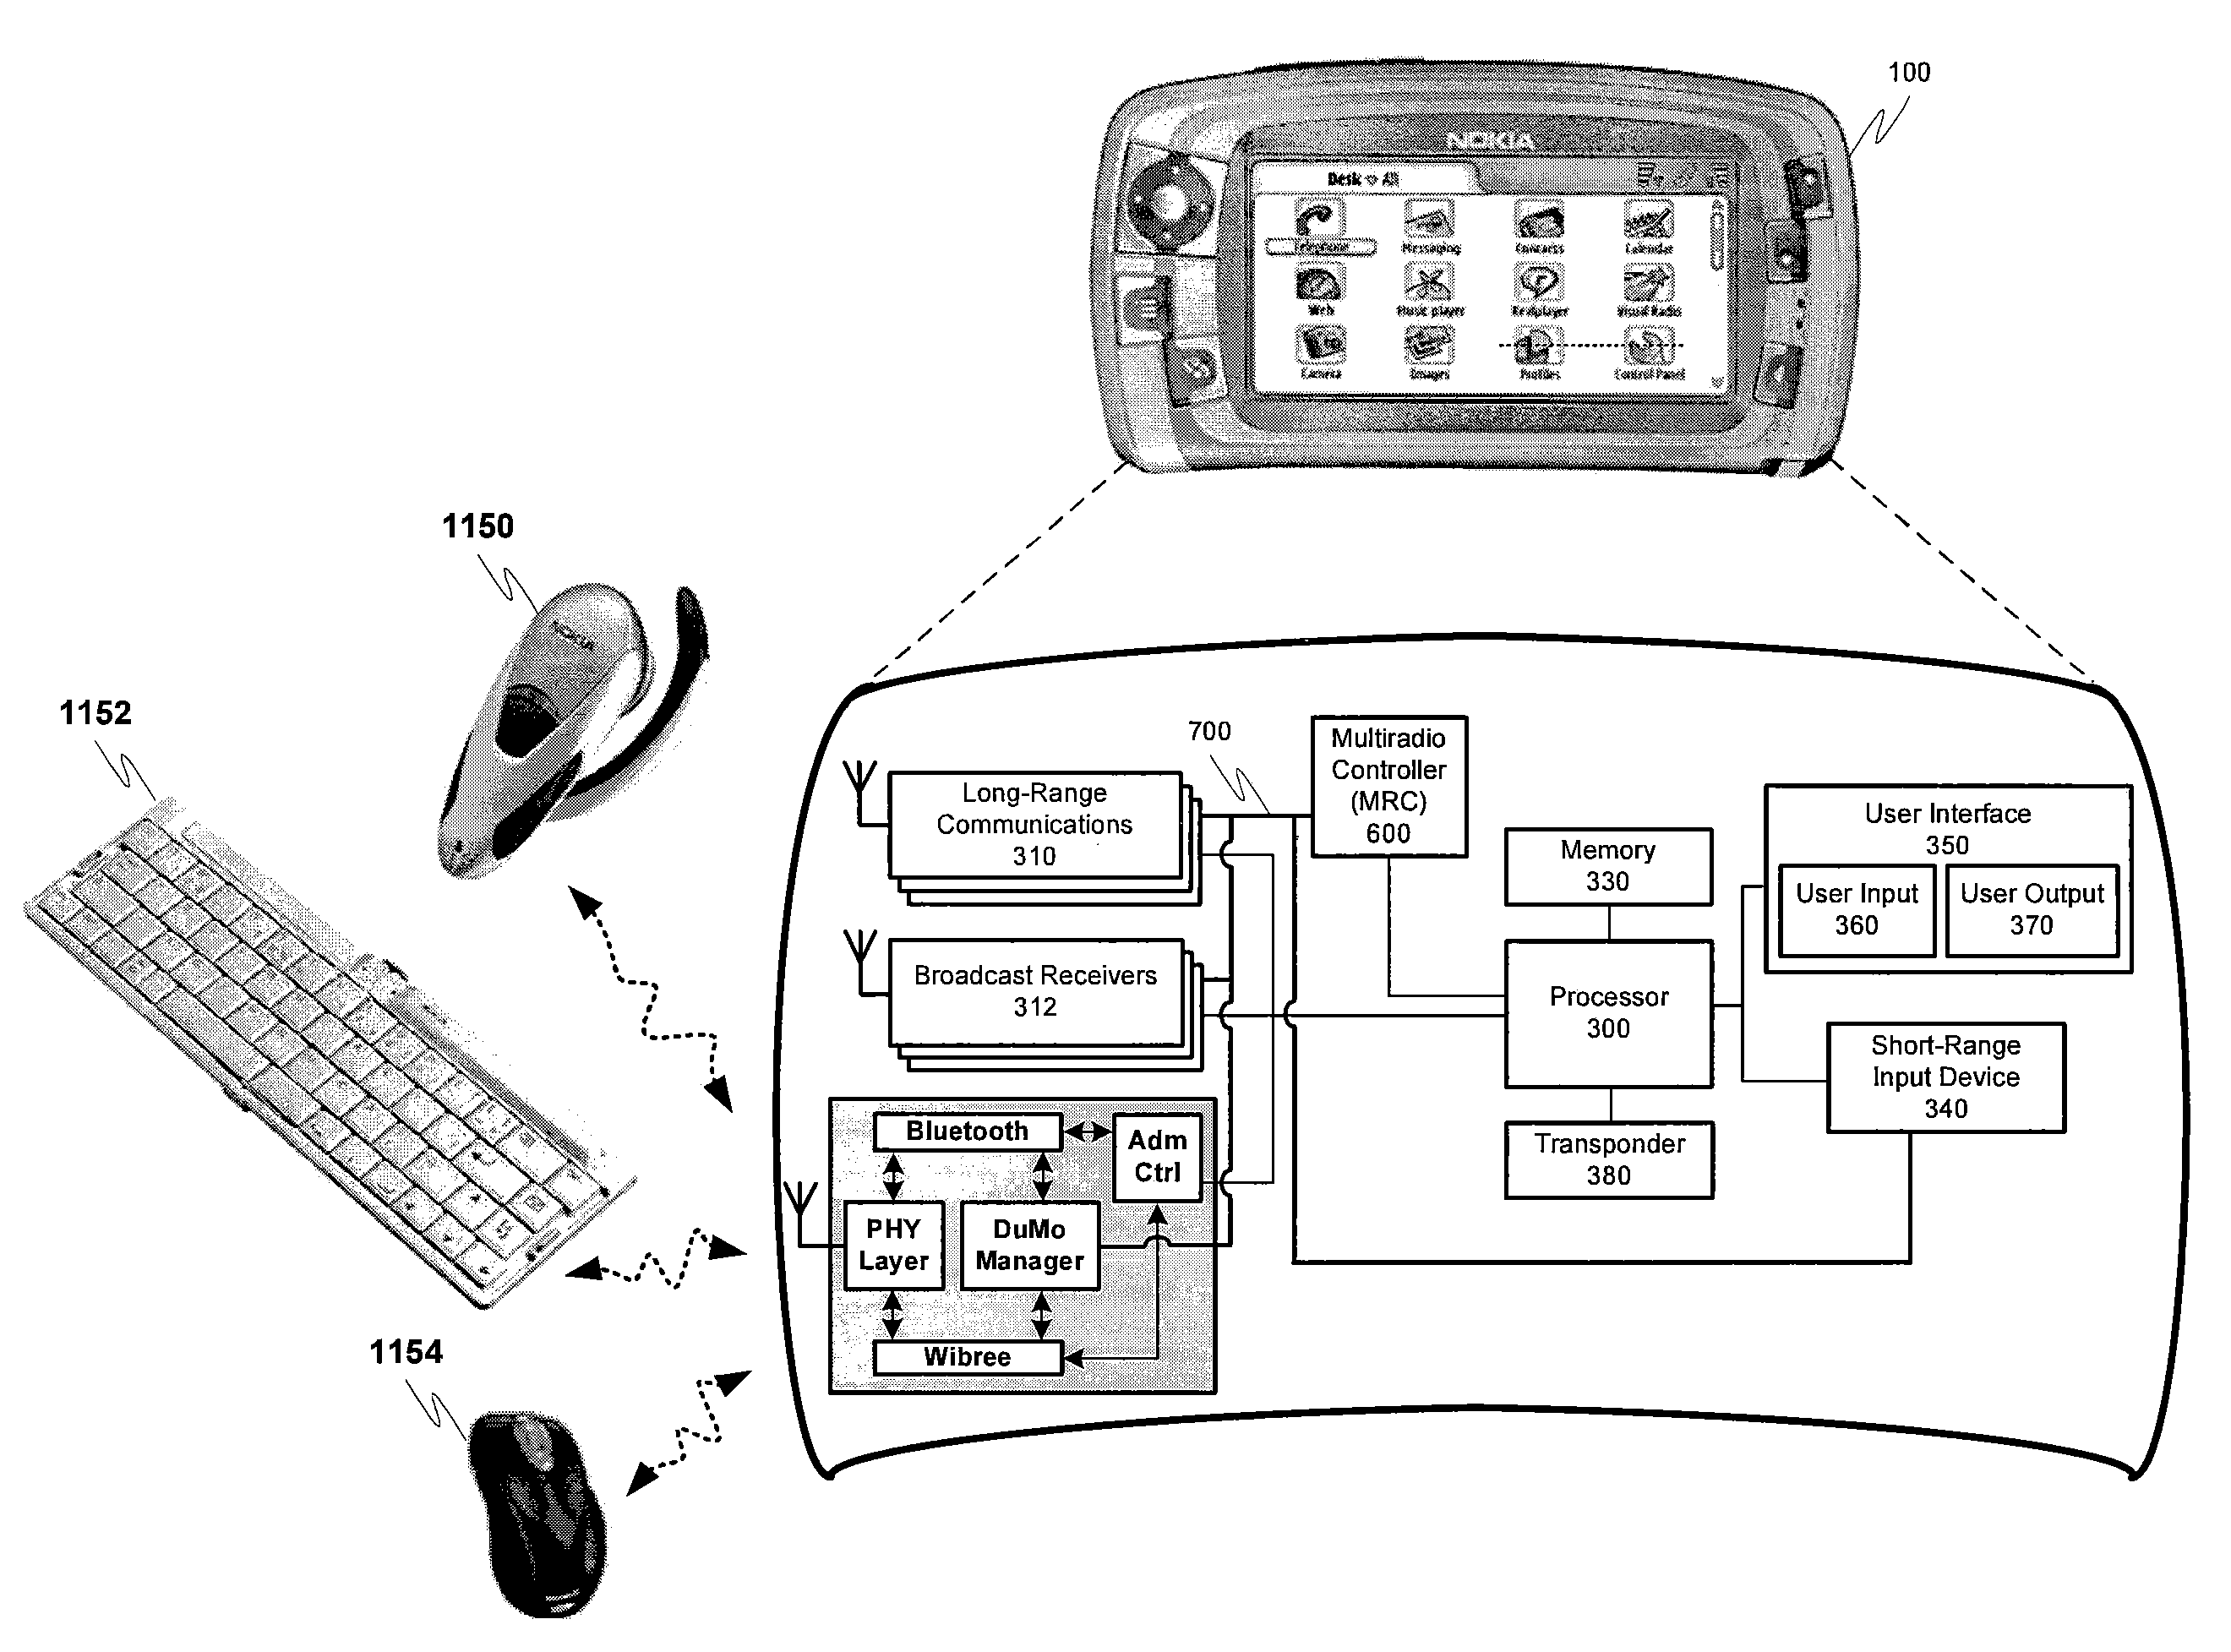 System for managing radio modems